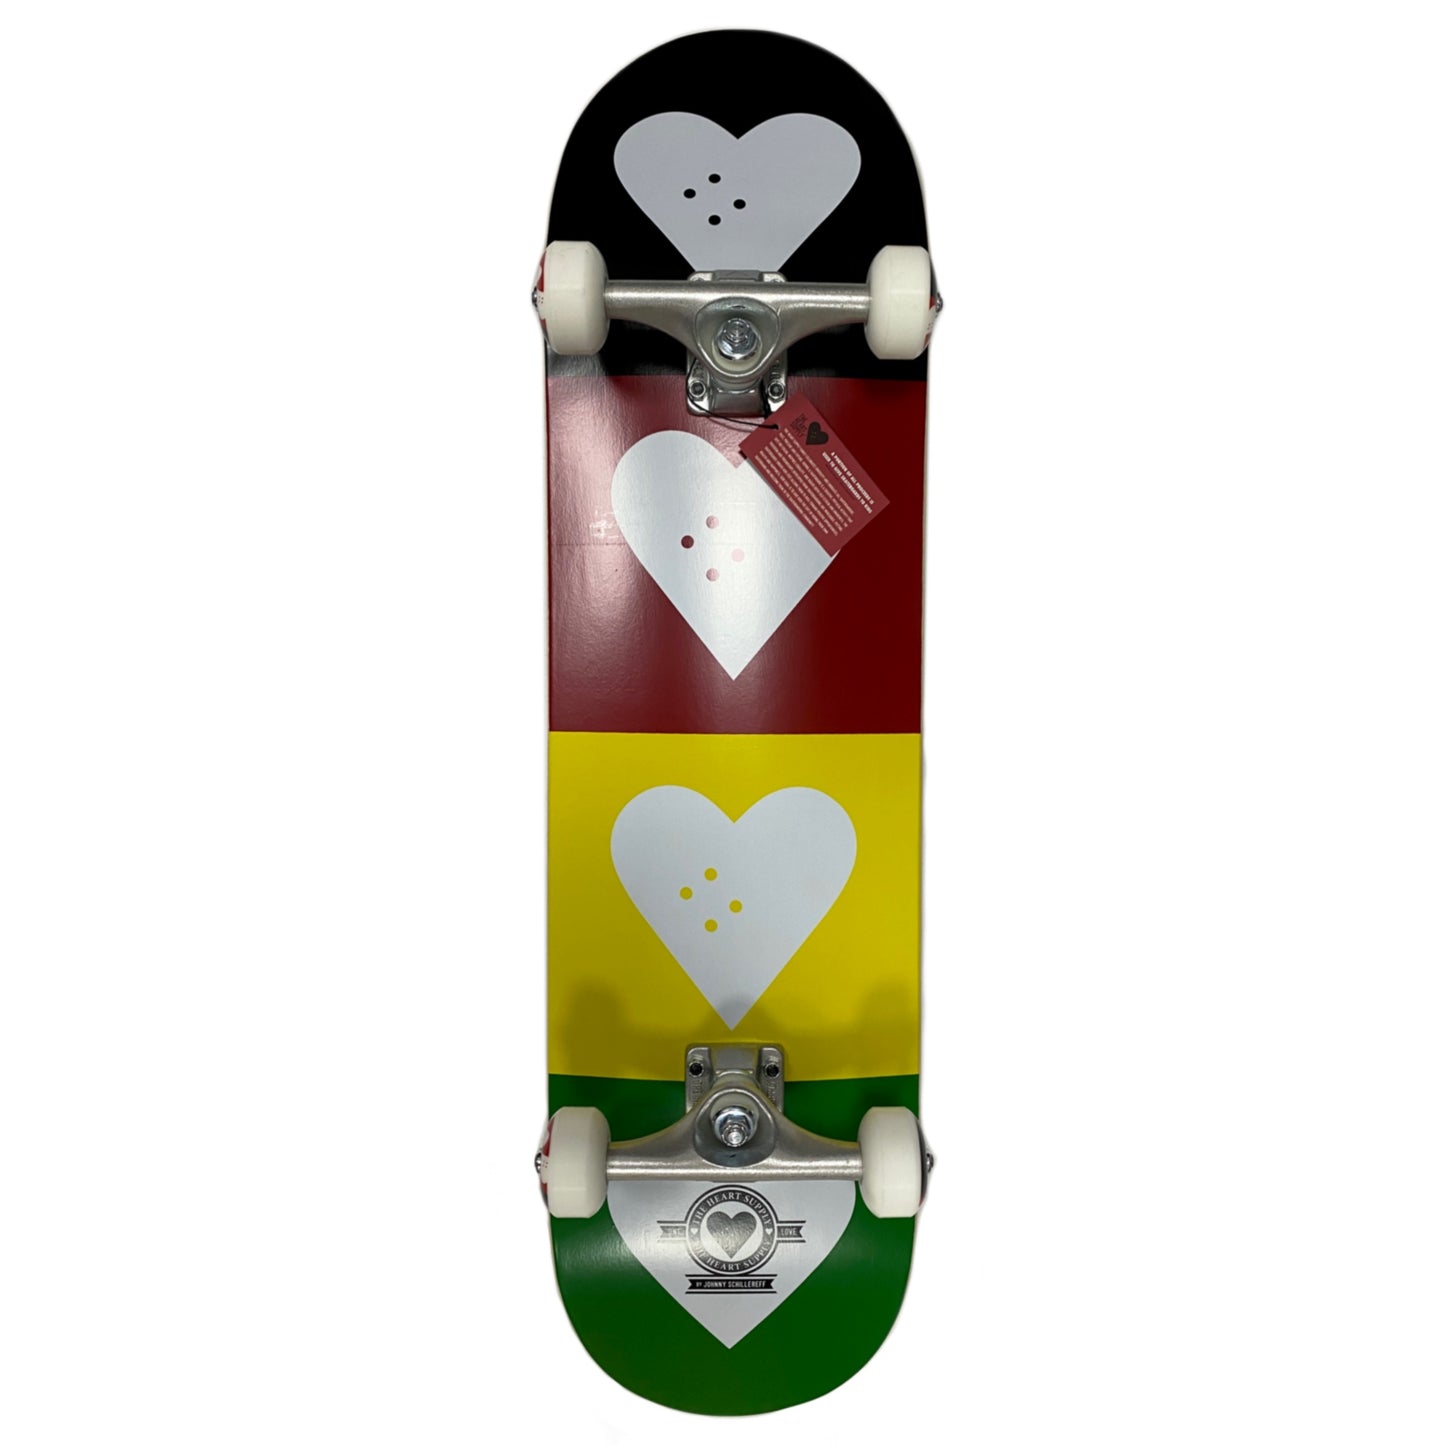 The Heart Supply Quad Logo Red, Gold & Green 8.25” Skateboard Complete